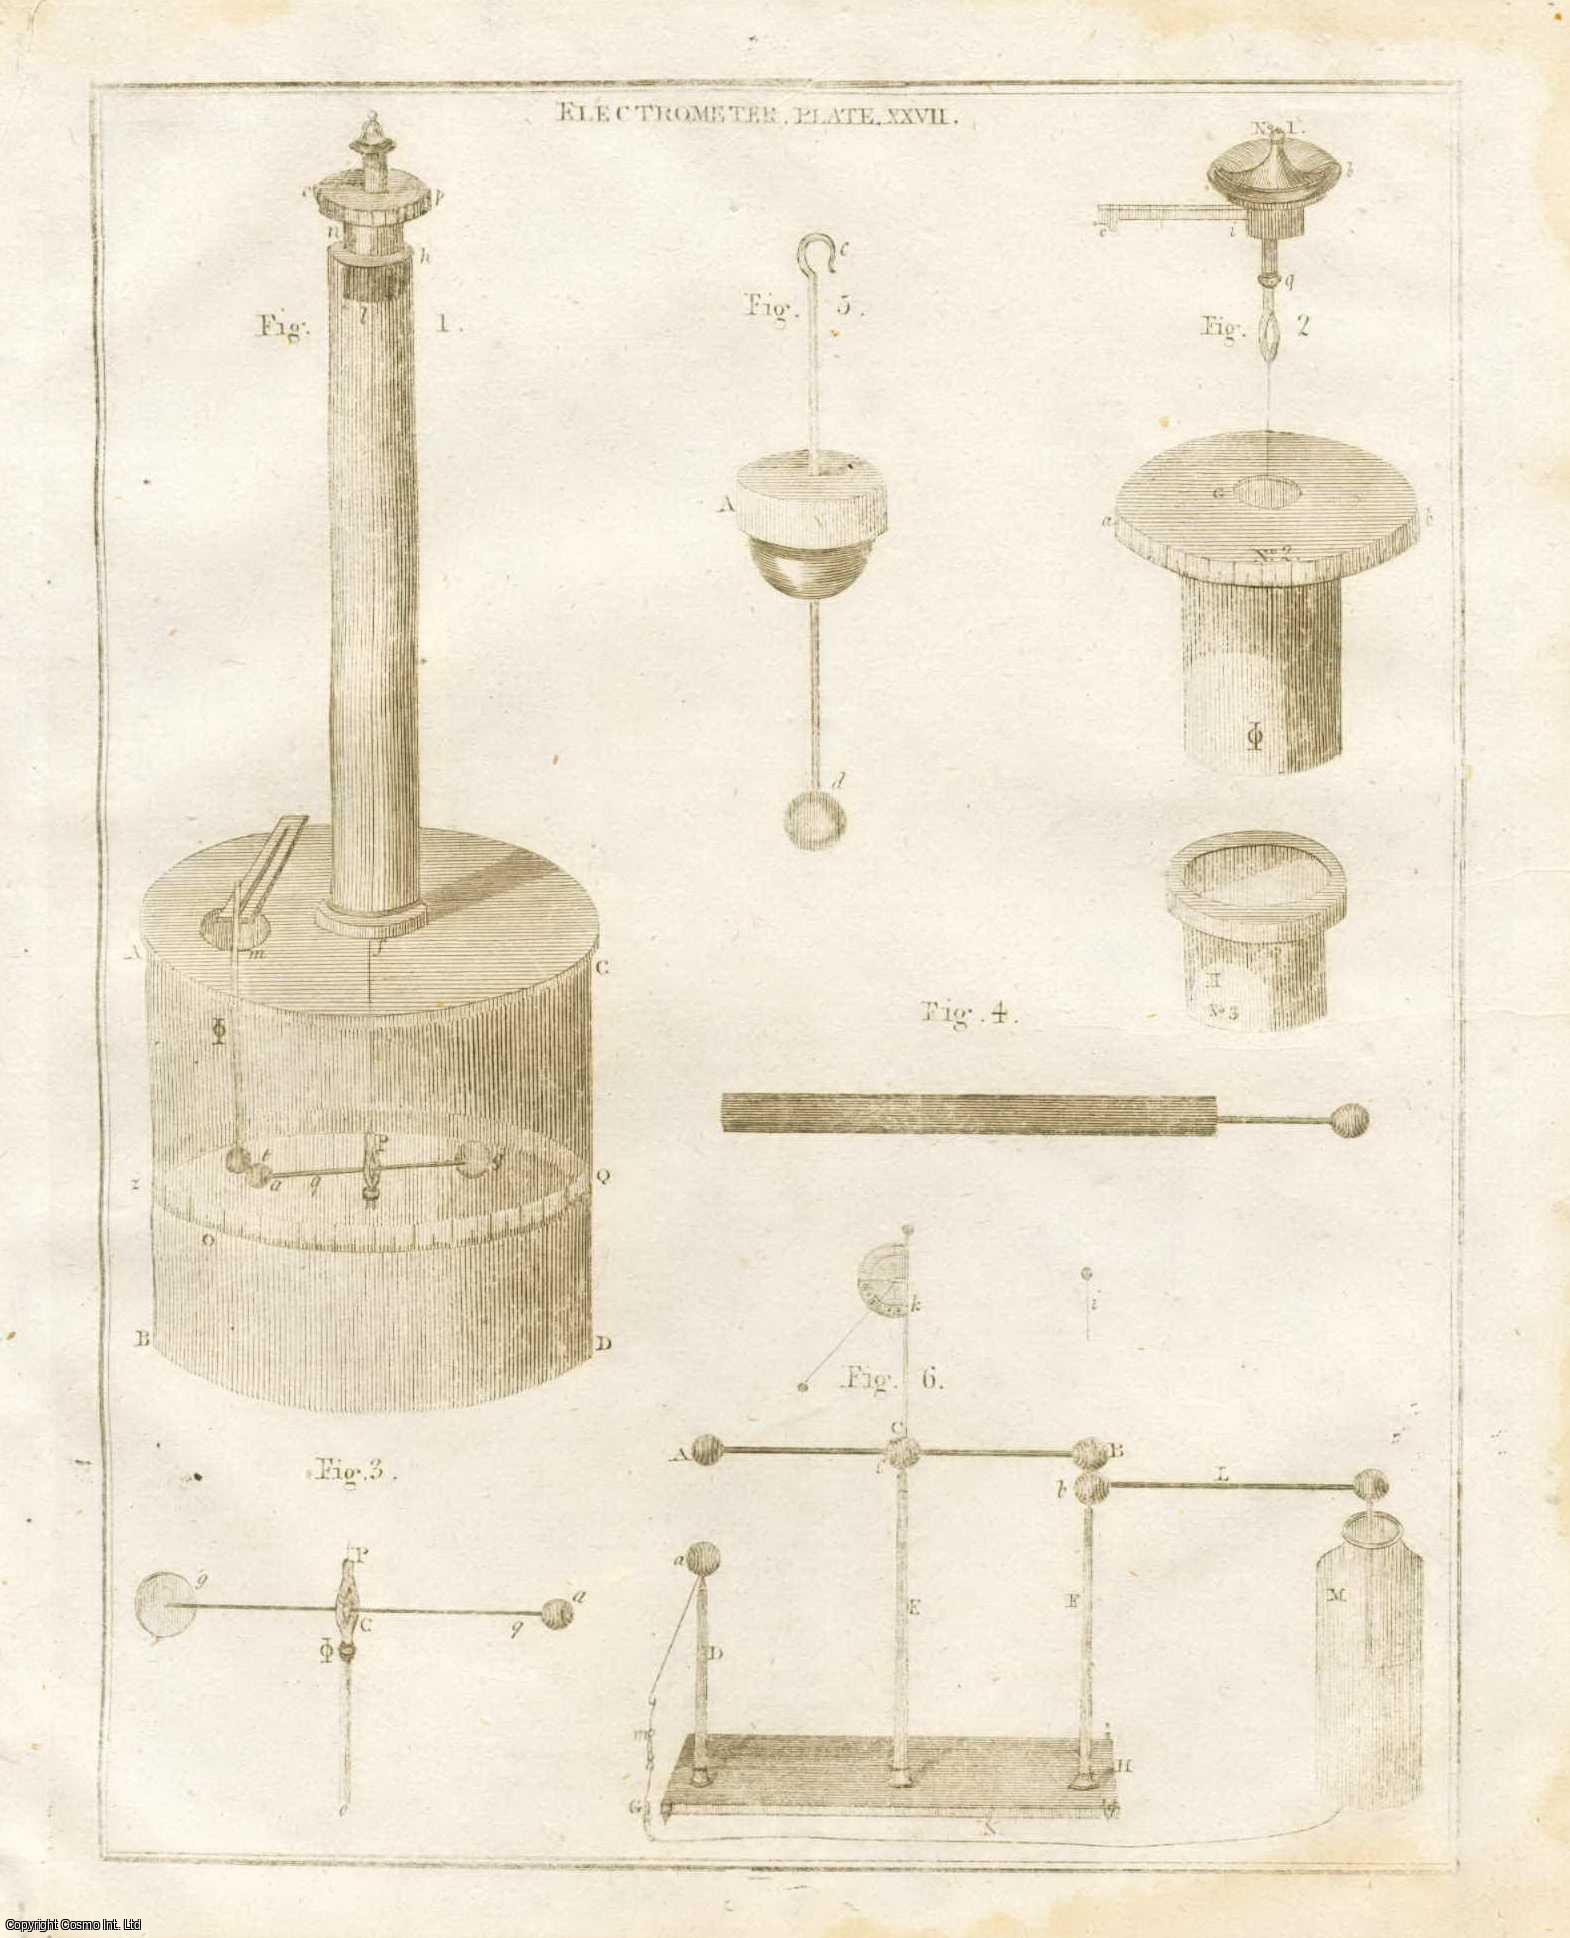 1801 - A plate featuring an Electrometer, from the Encyclopaedia Britannica, 1797.